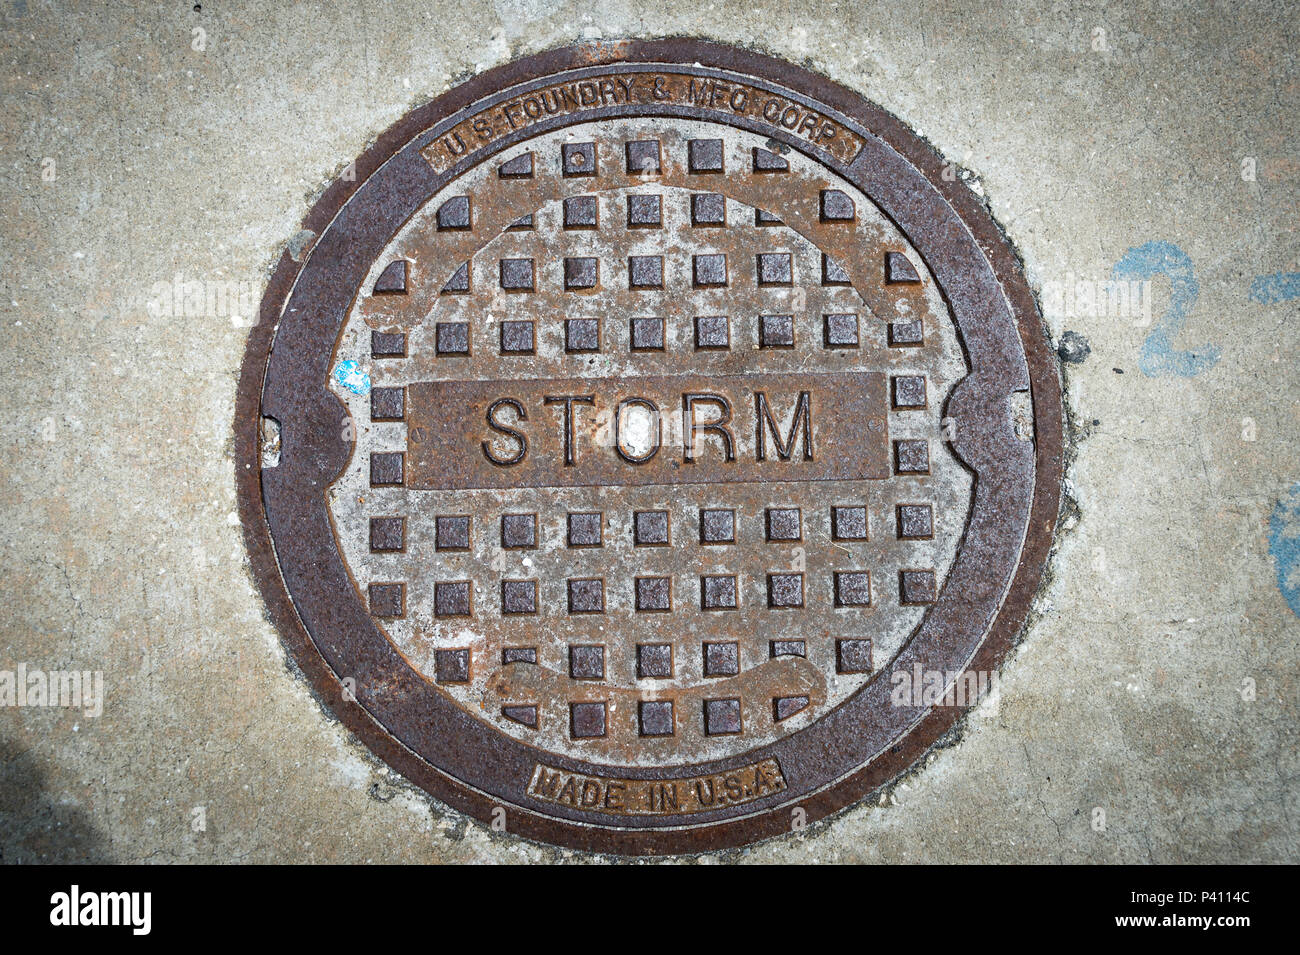 close up of a metal storm drain cover in the USA Stock Photo